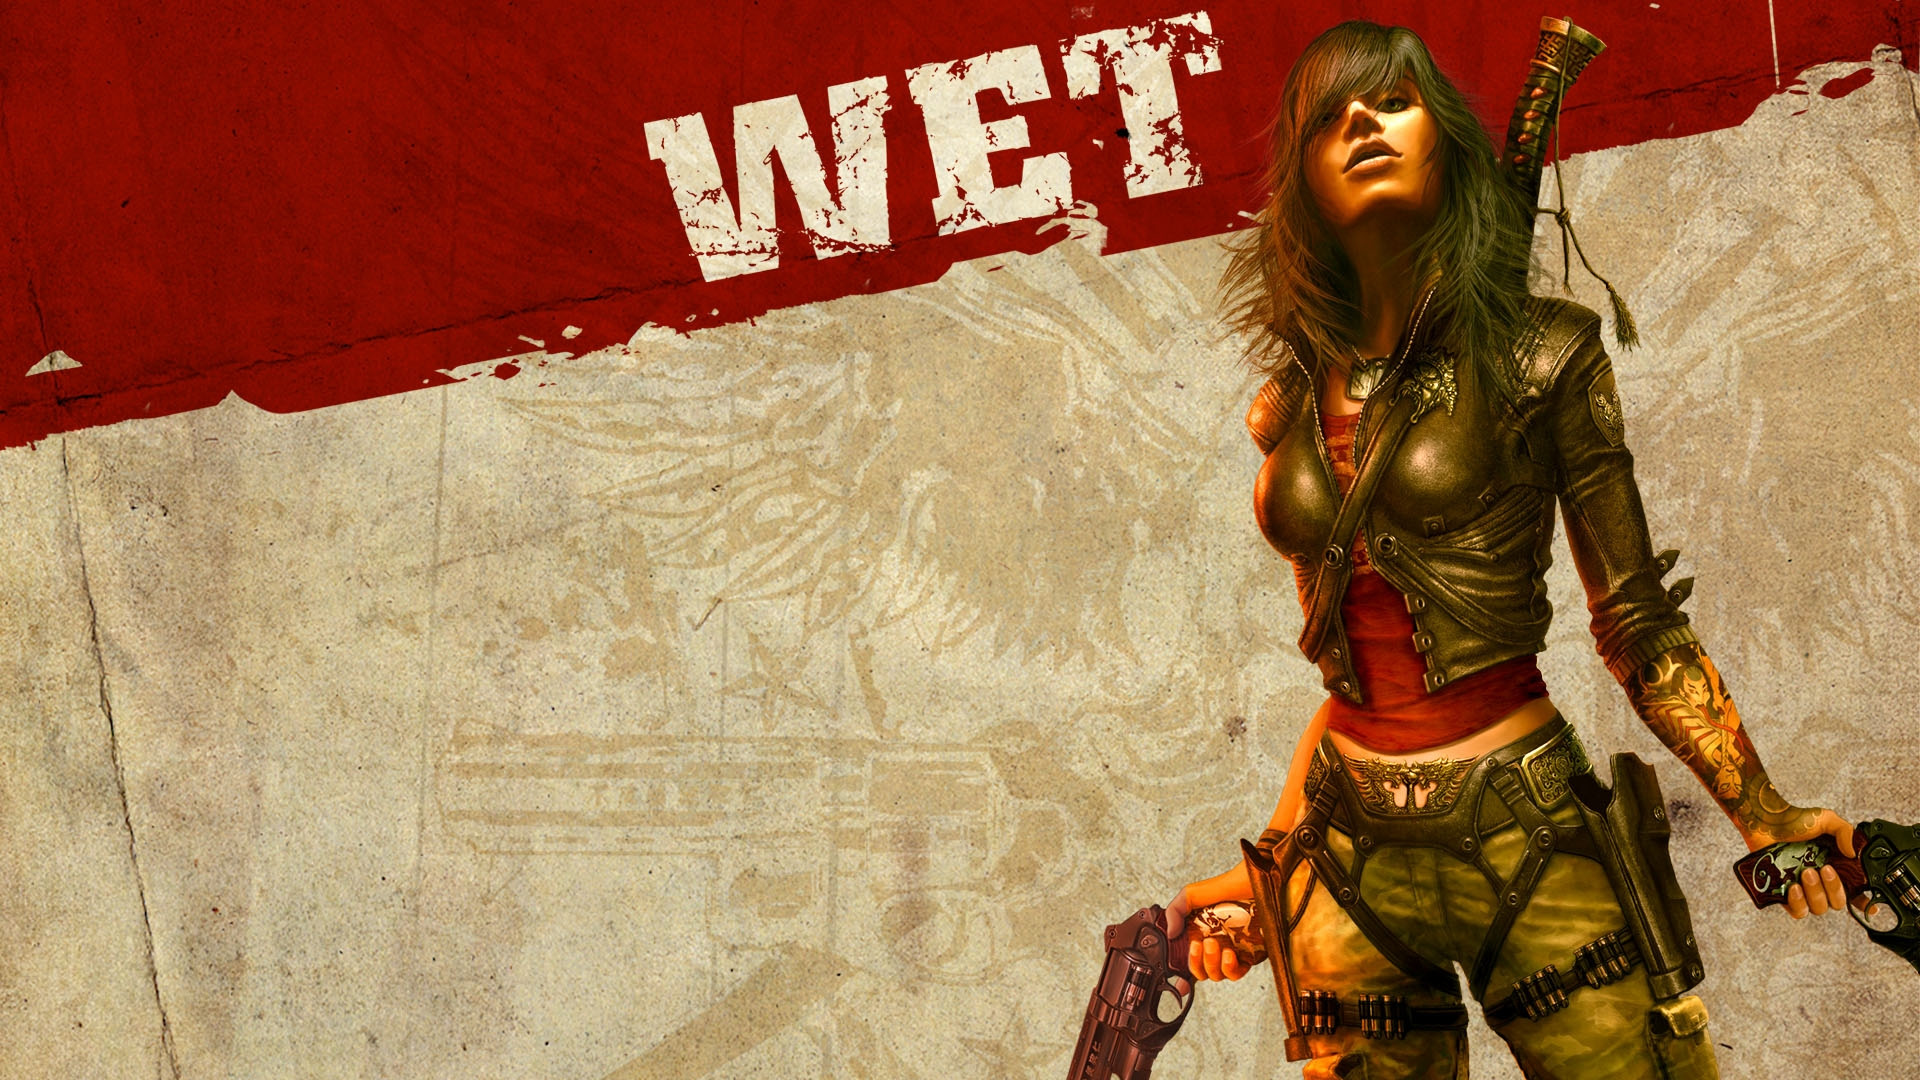 Wet (Video Game) Wallpapers HD / Desktop and Mobile Backgrounds